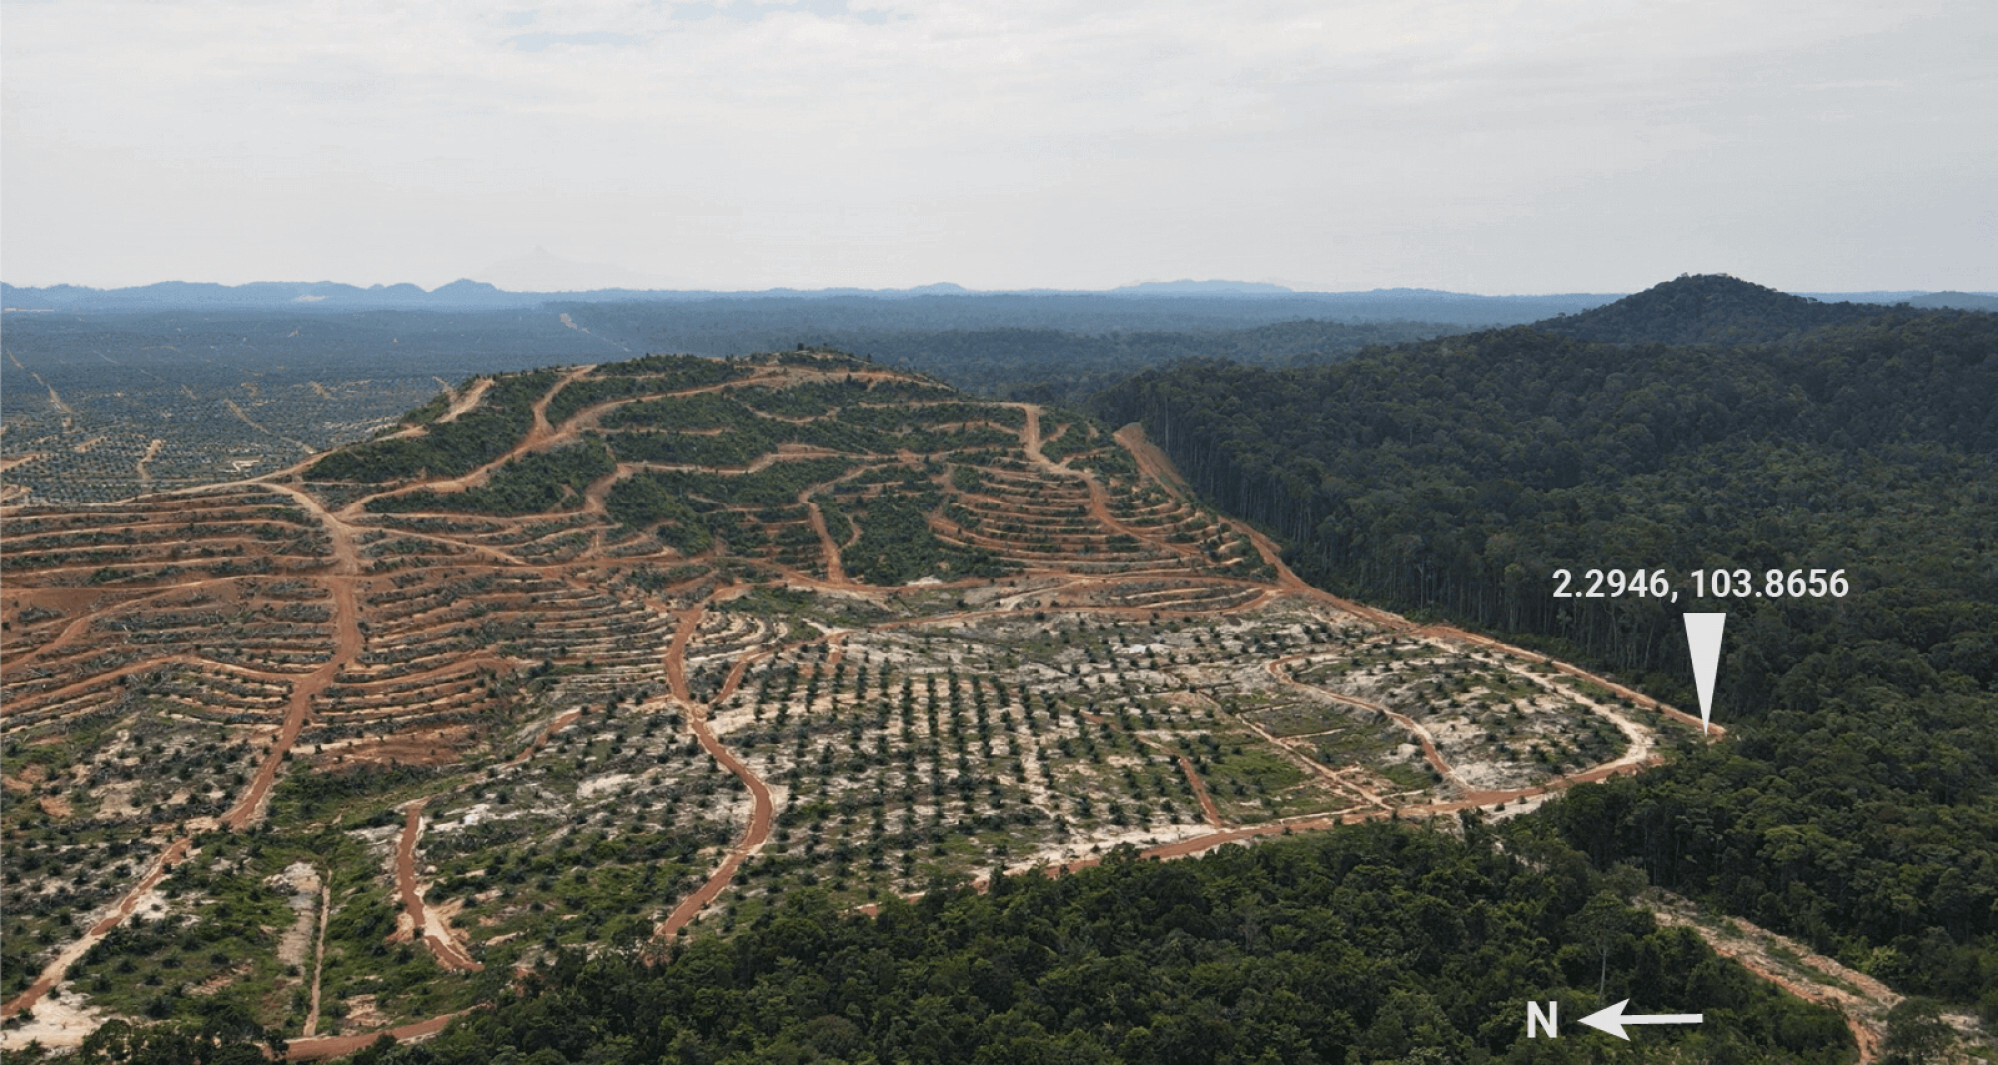 A 2,190-hectare oil palm plantation developed by AA Sawit in part of the excised Jemaluang forest reserve in Johor, Malaysia. Photo: IMR Kreatif